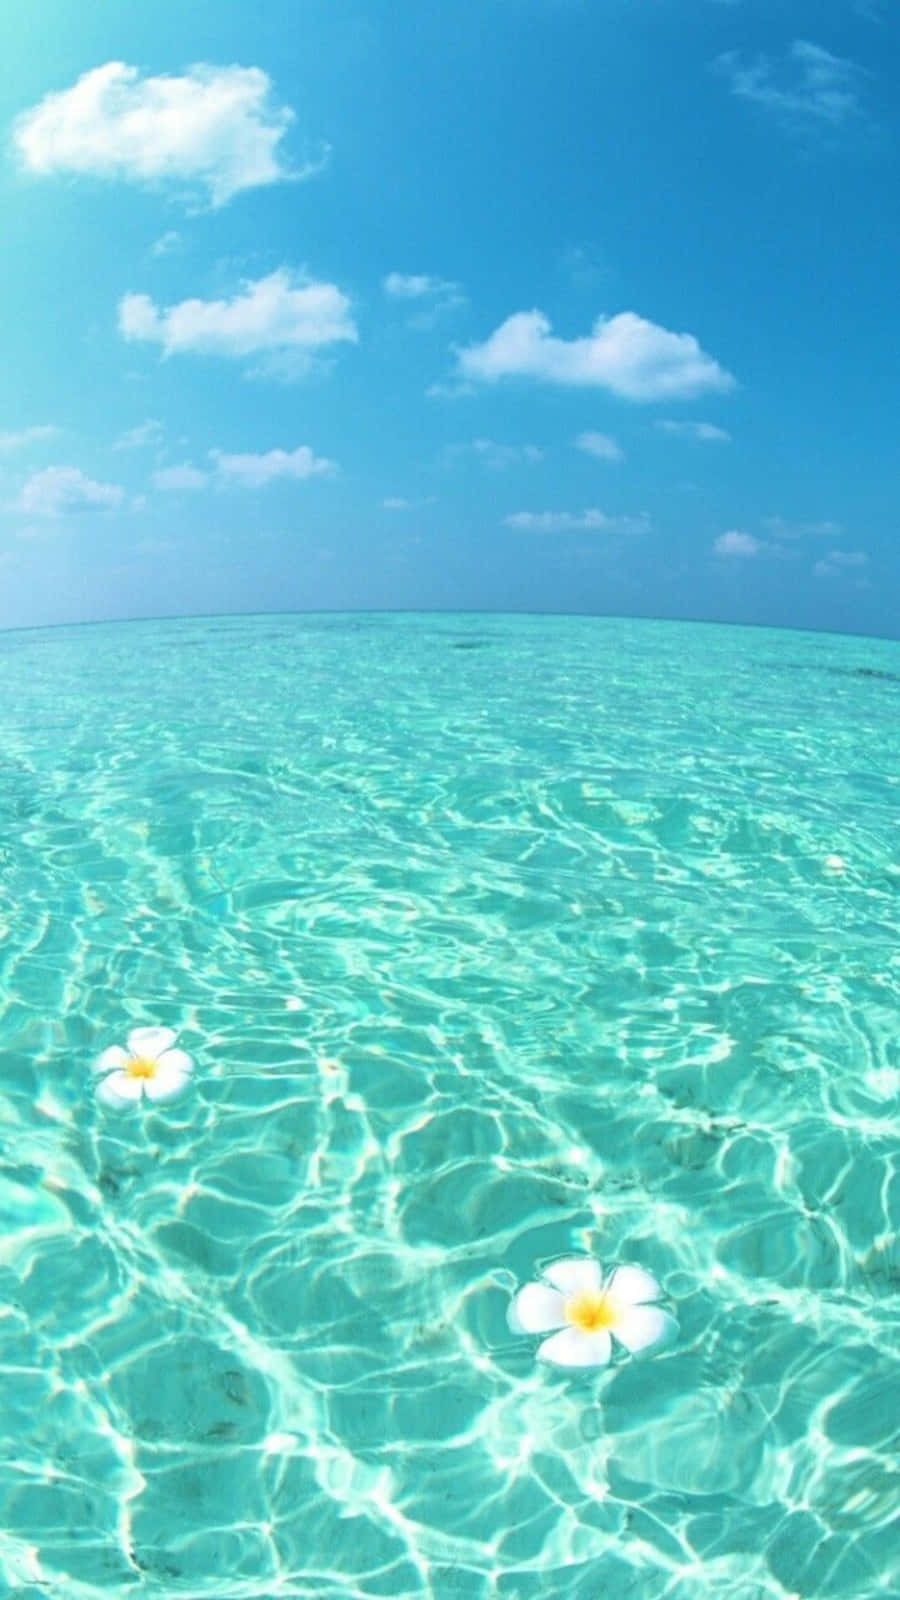 A Clear Blue Ocean With White Flowers Floating In The Water Background